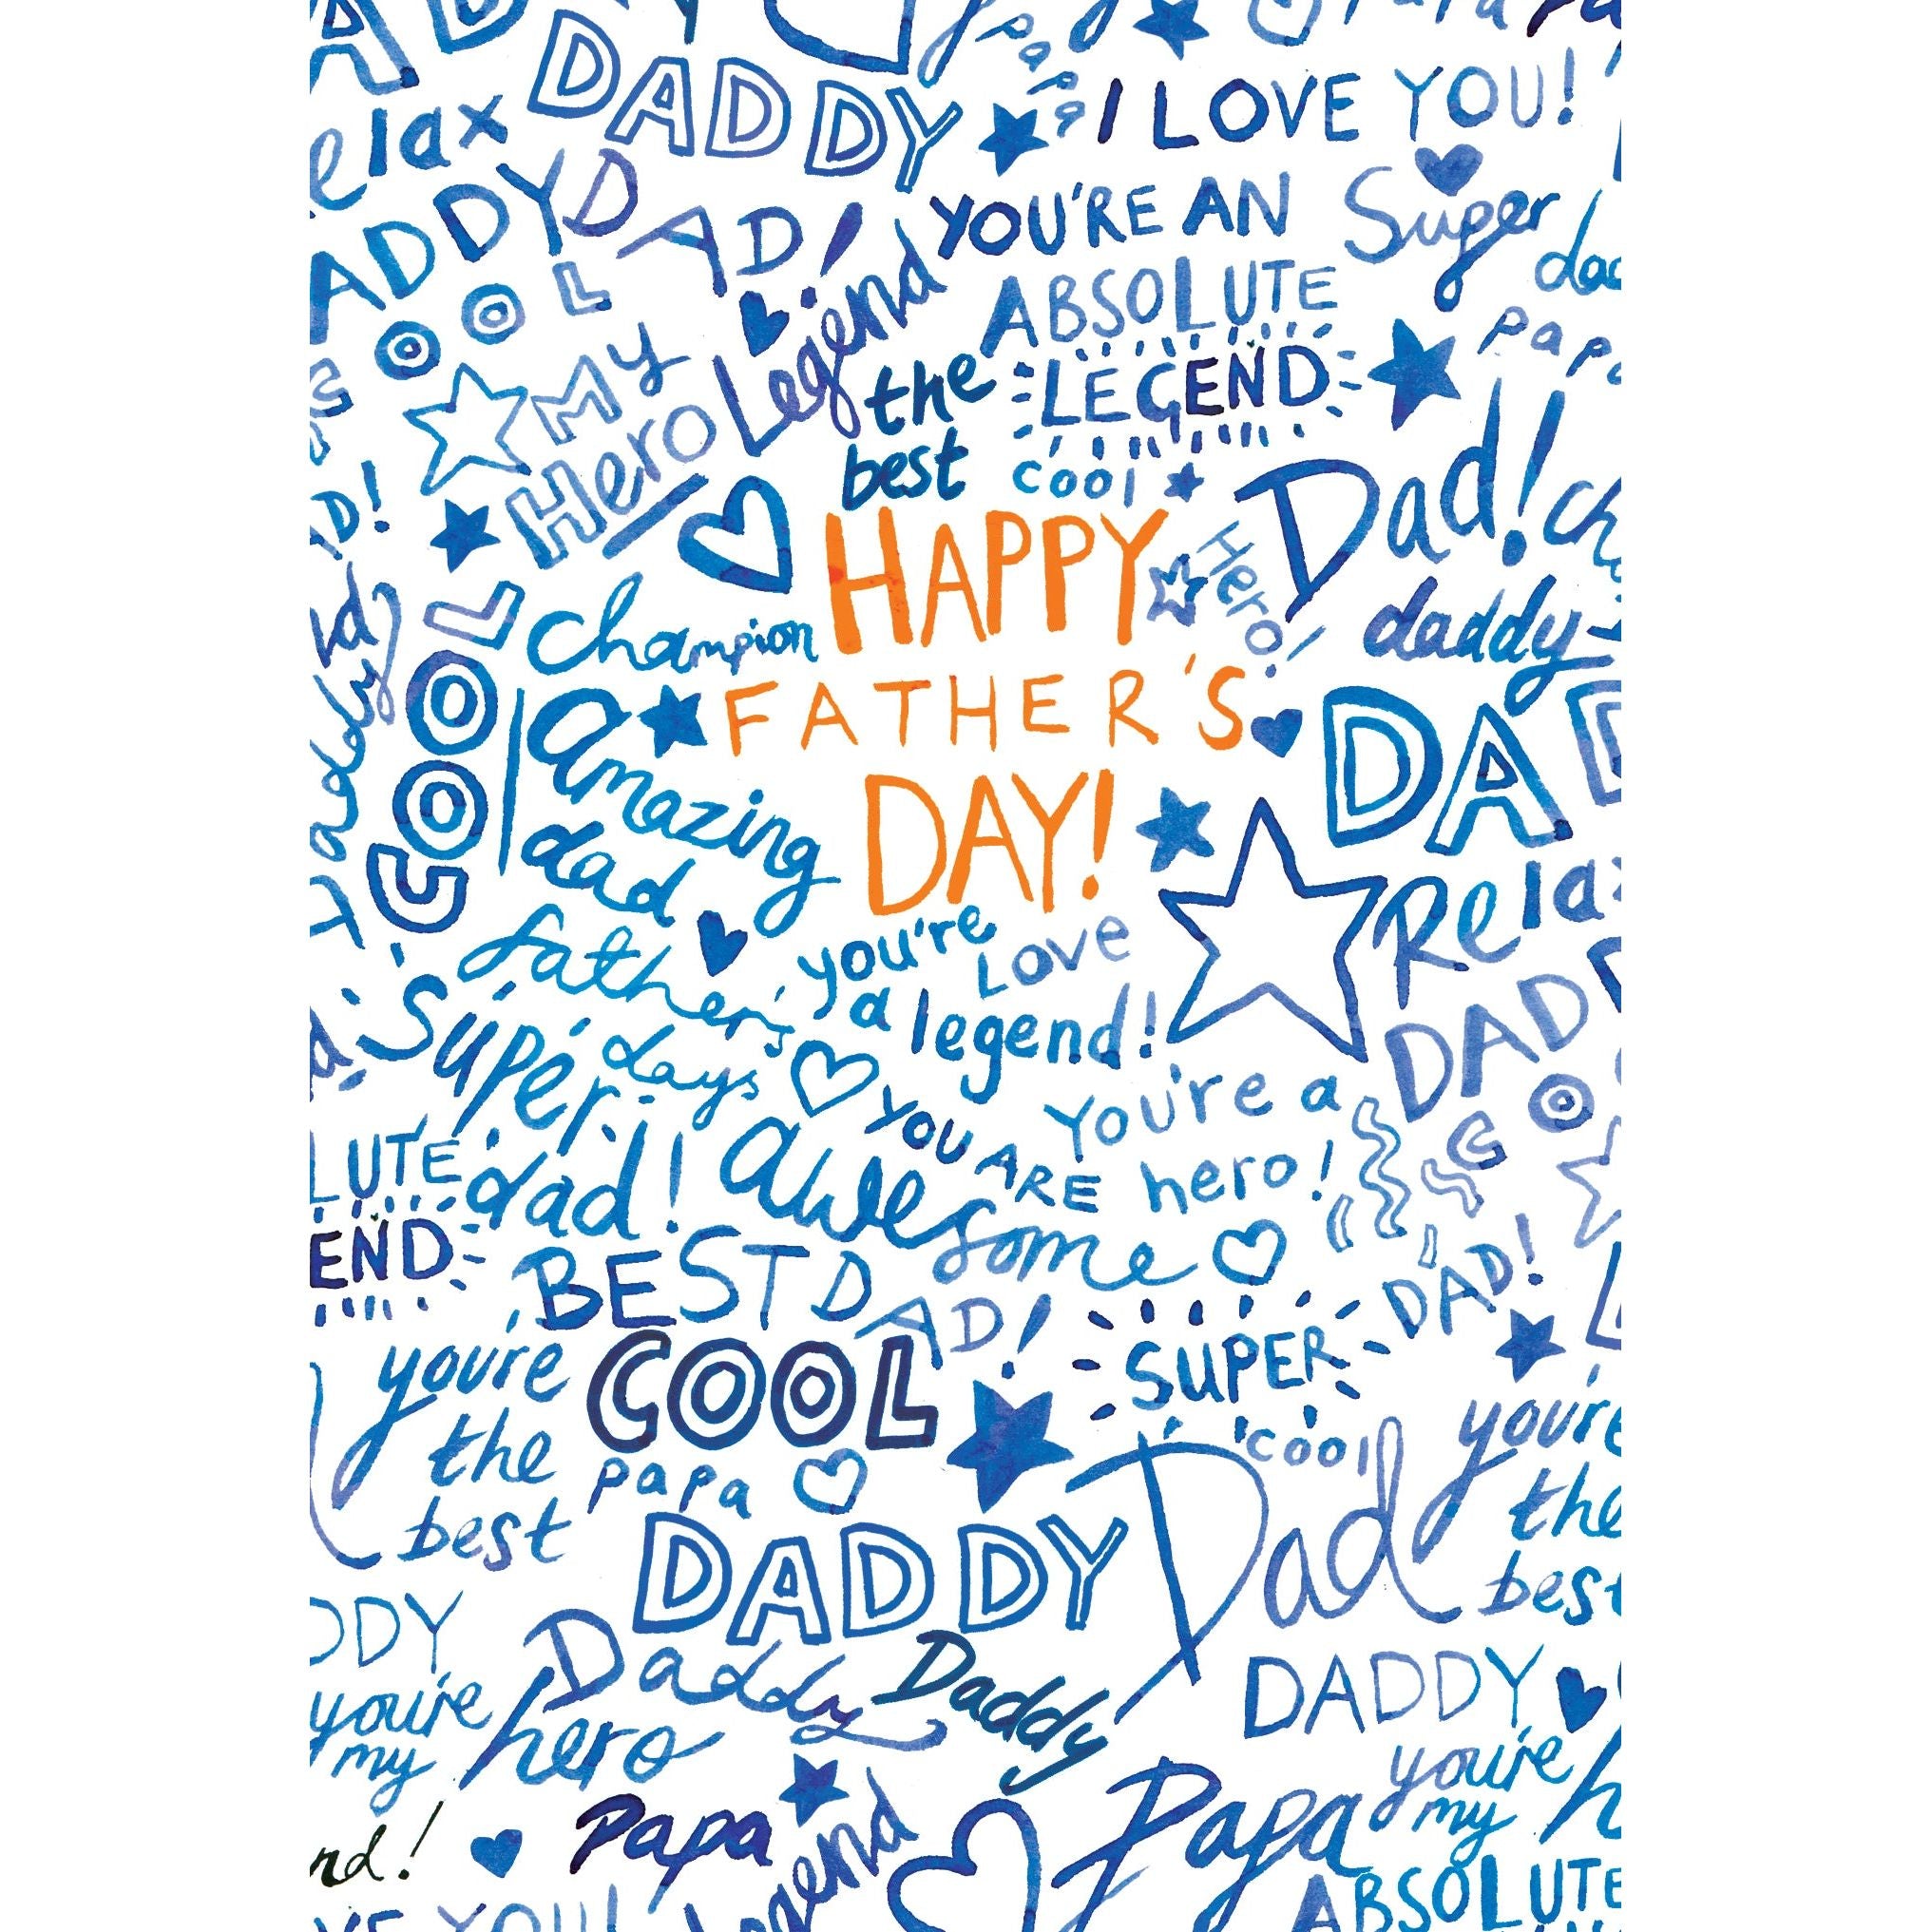 Dad Handwritten Father's Day Card